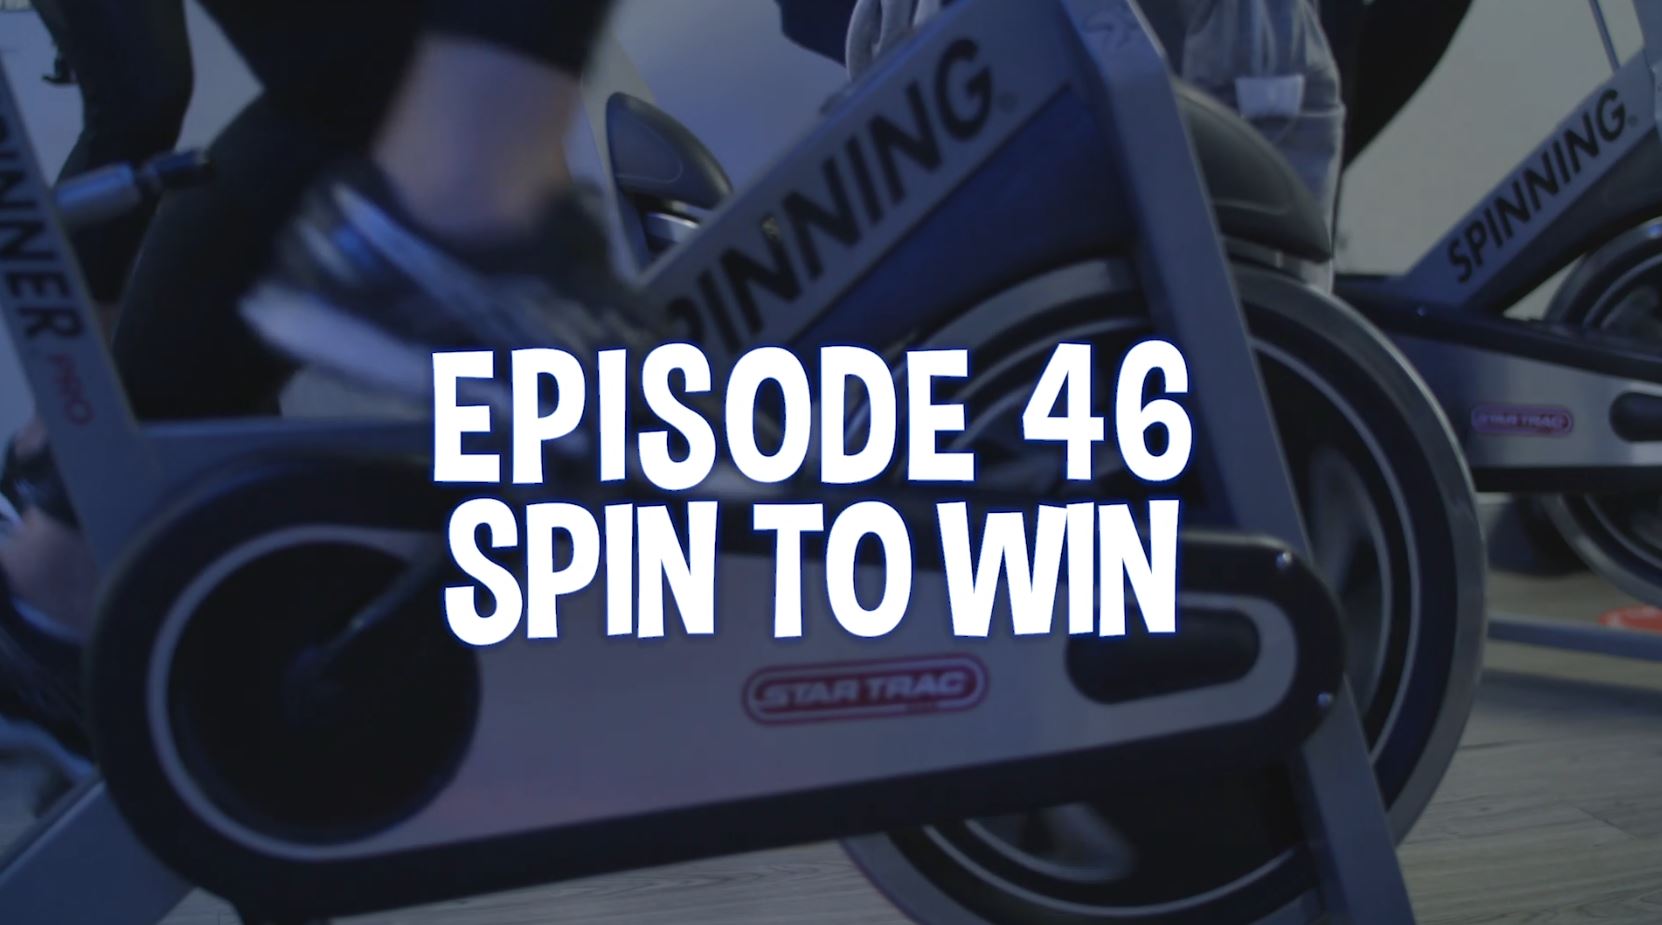 Spin to win fitness republic video series online